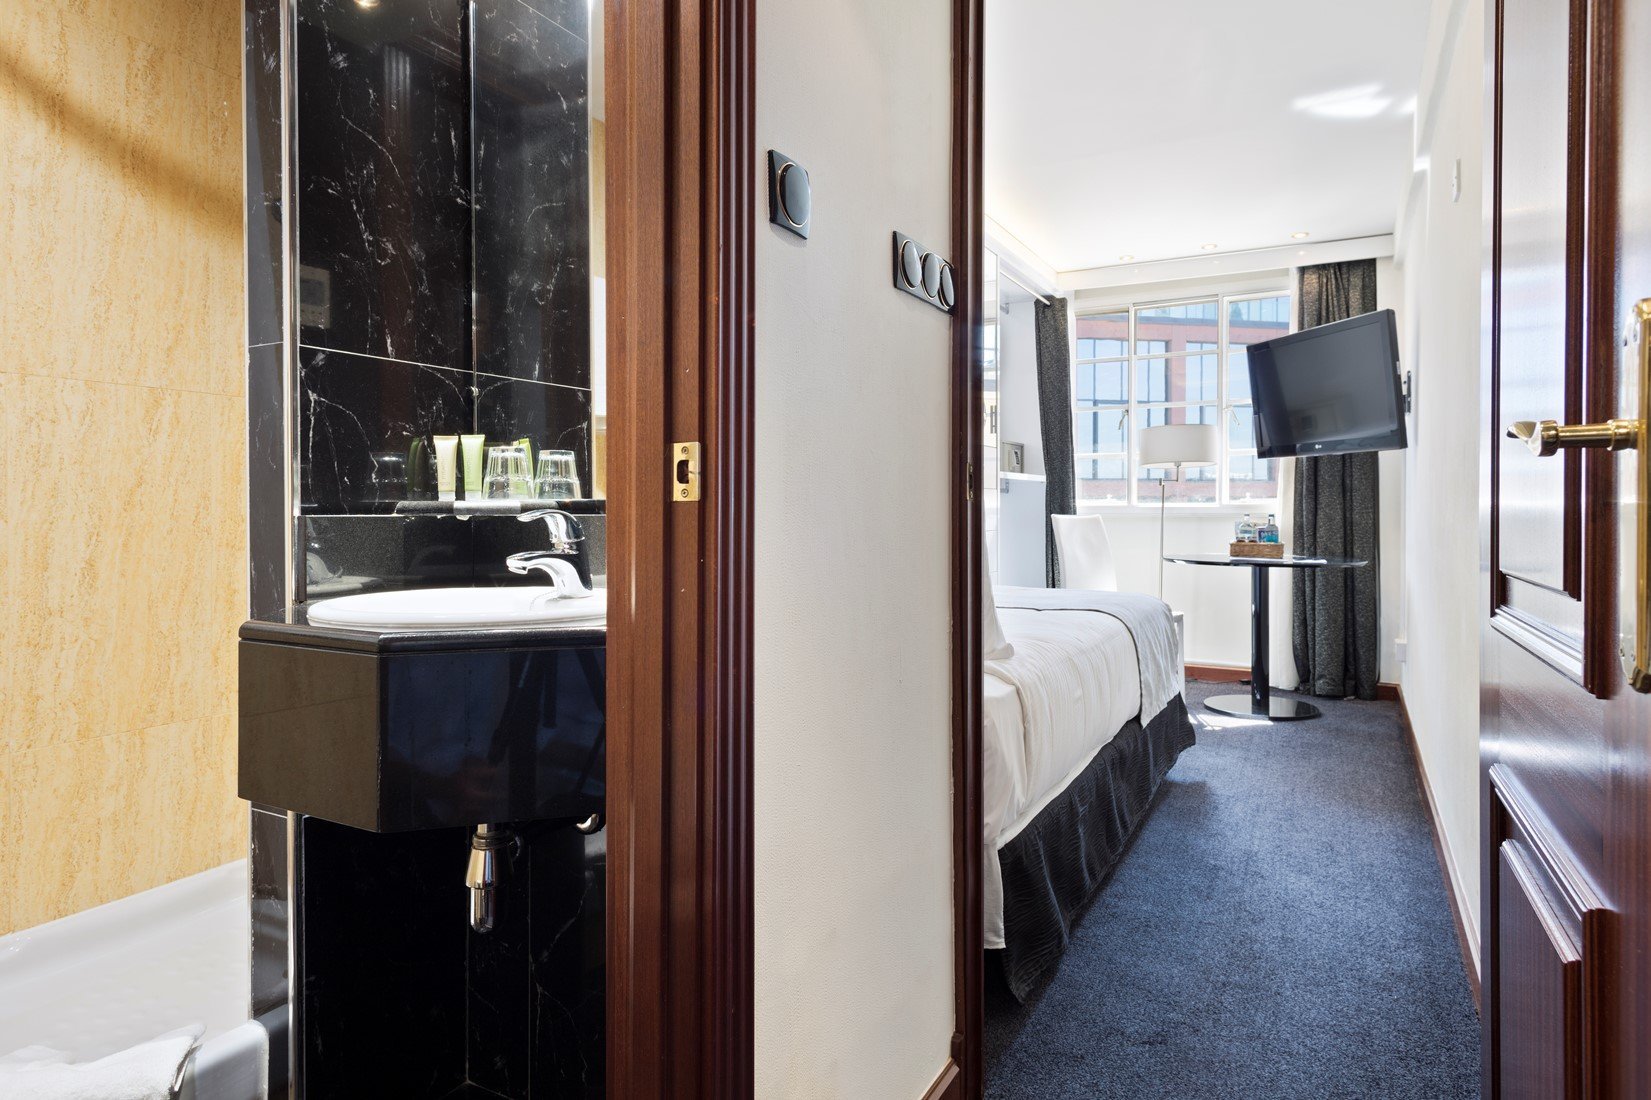 Low-Cost-Luxury-Regents-Park-Serviced-Apartments-London!-Book-With-Urban-Stay-today-from-only-£92/night!-Free-Wifi-+-Gym-+-Reception!